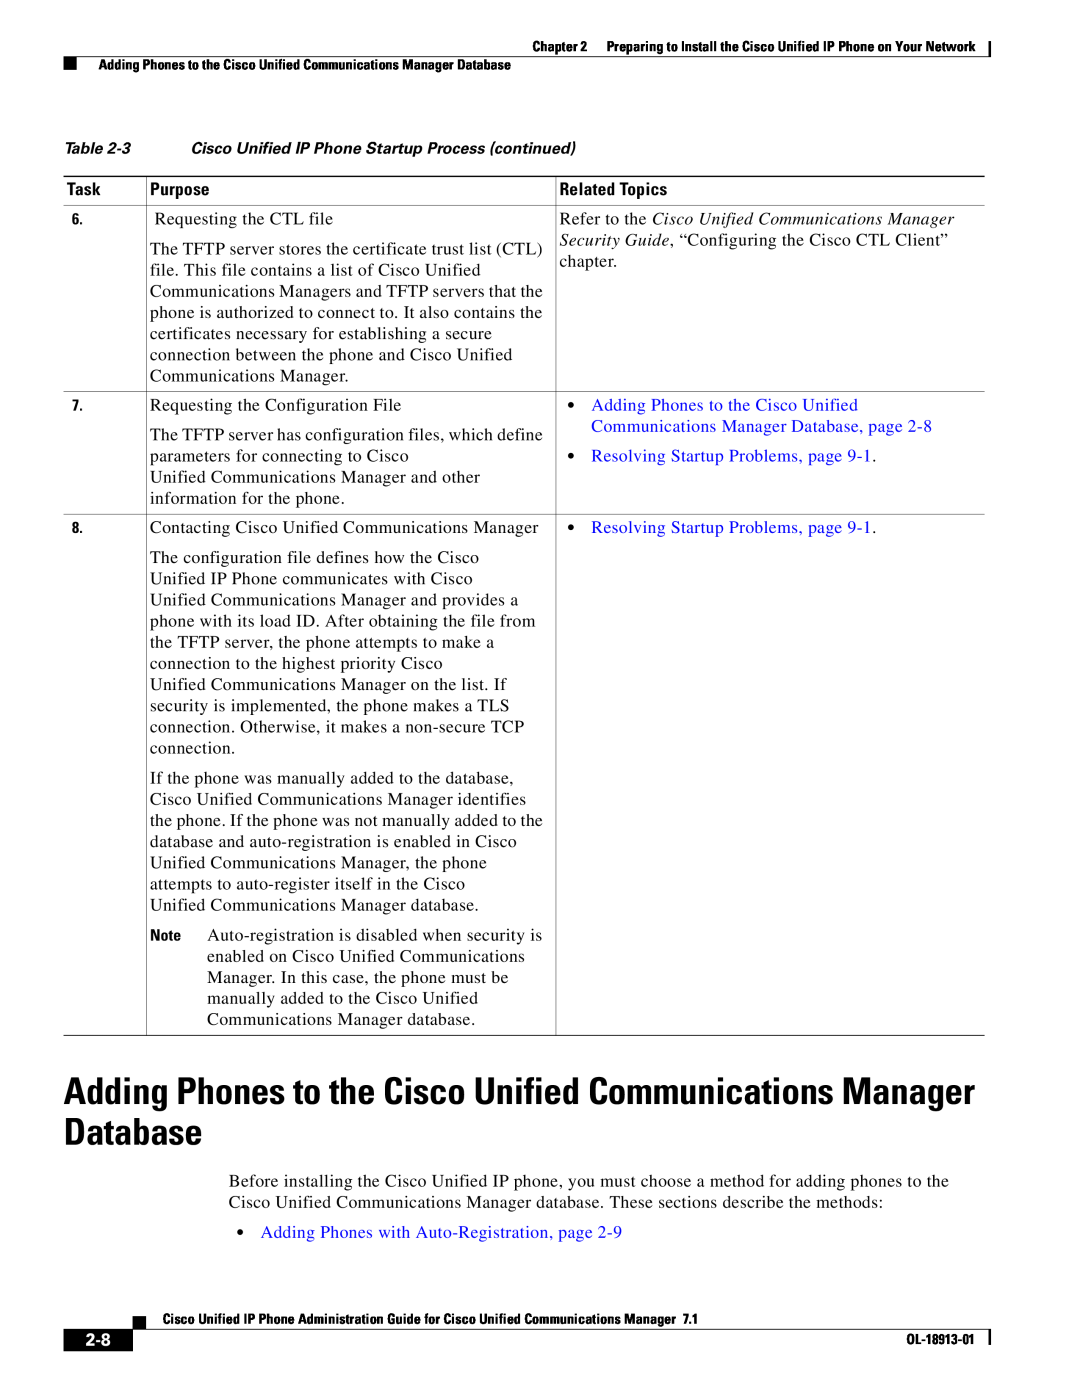 Cisco Systems 71 manual Adding Phones to the Cisco Unified Communications Manager Database, Purpose, Related Topics 